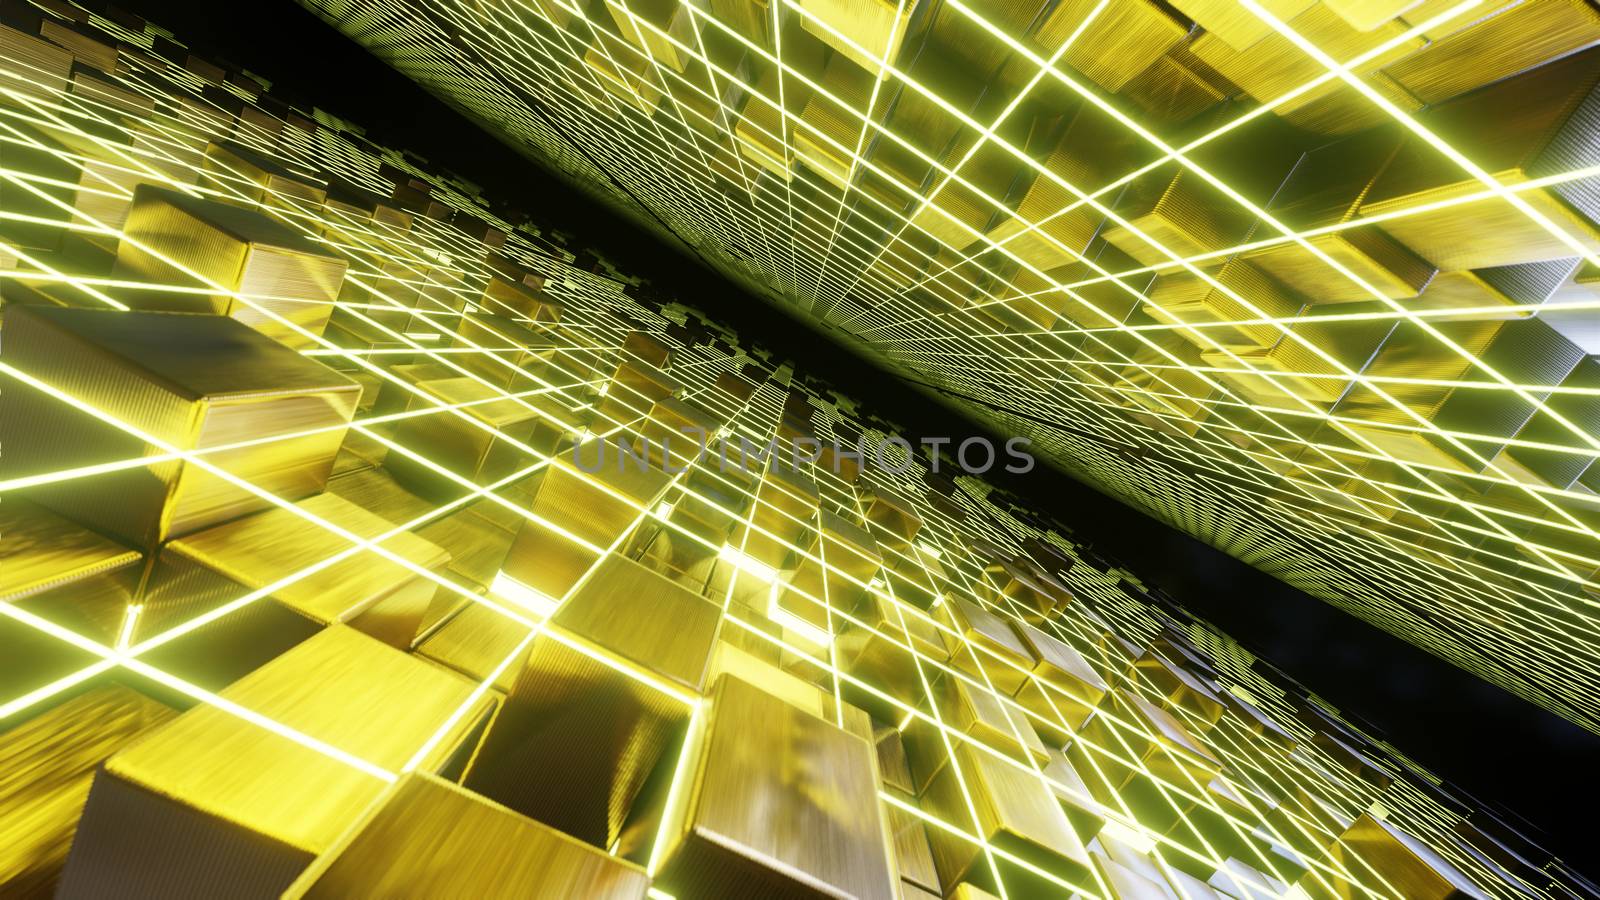 Flying Grid On Gold Cube by urzine